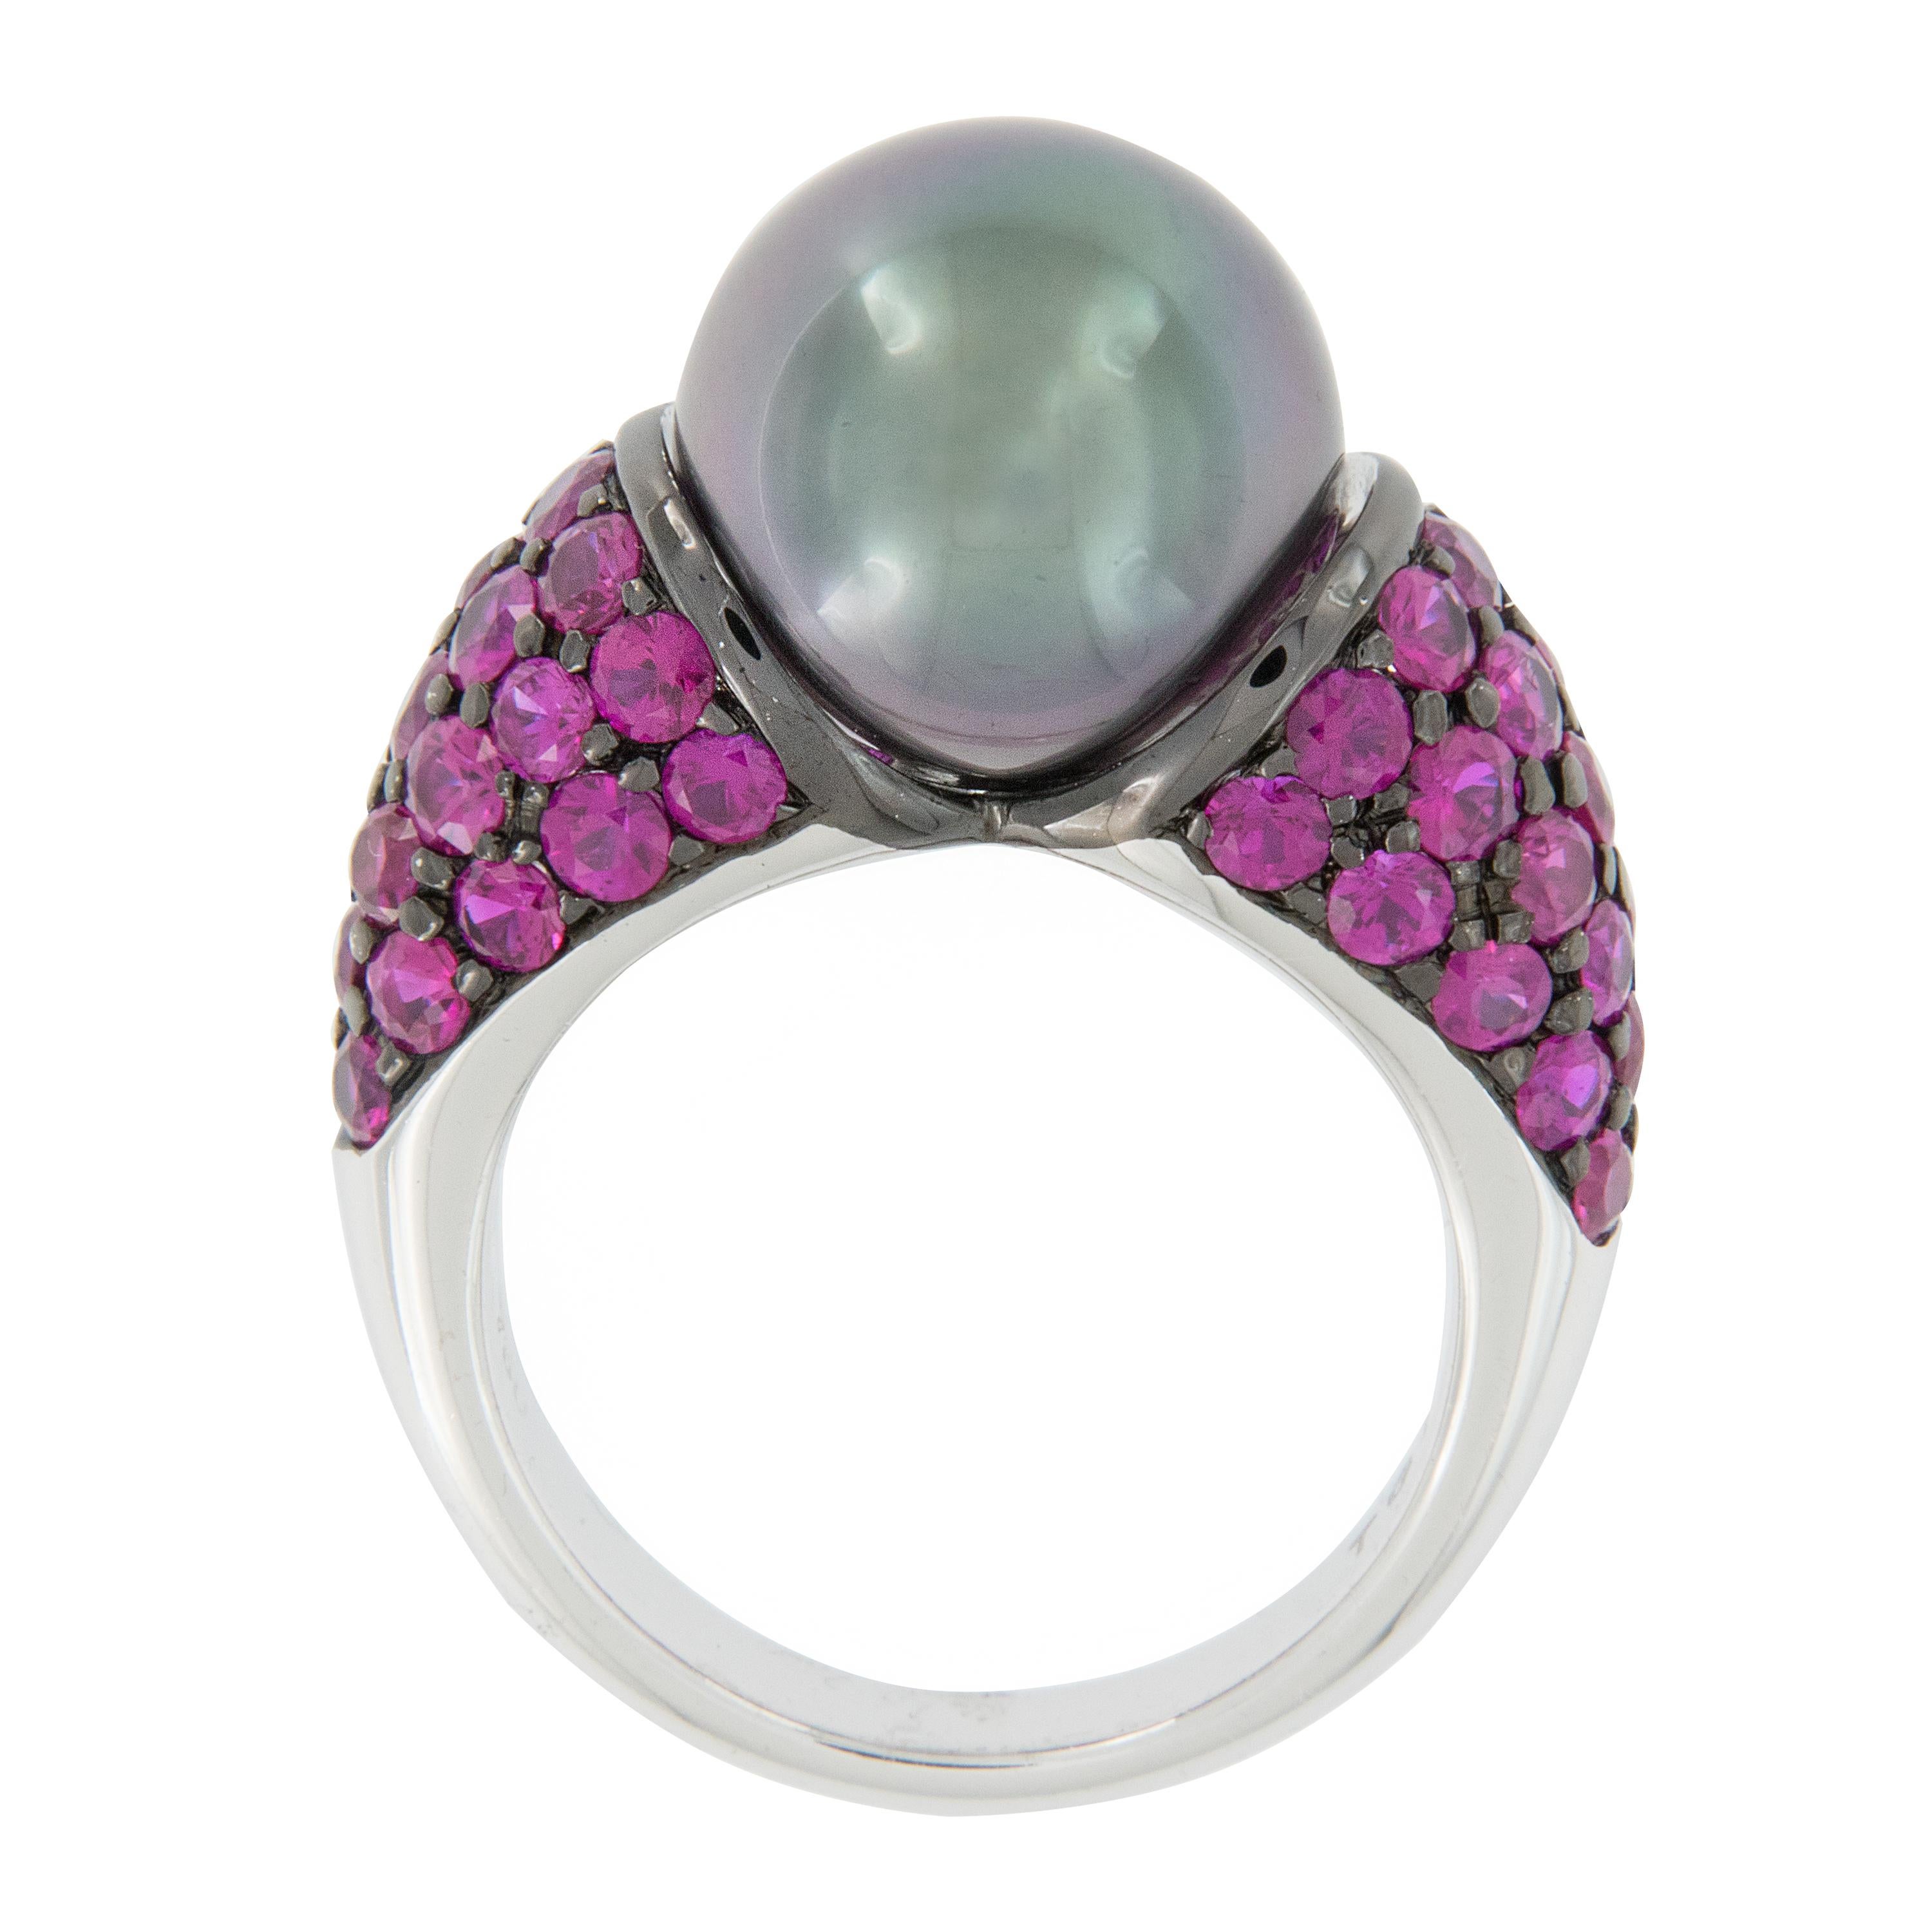 How HOT is this gorgeous ring crafted in 18 karat white gold? The spectacular grey Tahitian pearl with multi hued overtones is showcased by over 3 carats of HOT pink sapphires set in a Bombe' style. Ring is a size 6.5 but can be sized up or down 1